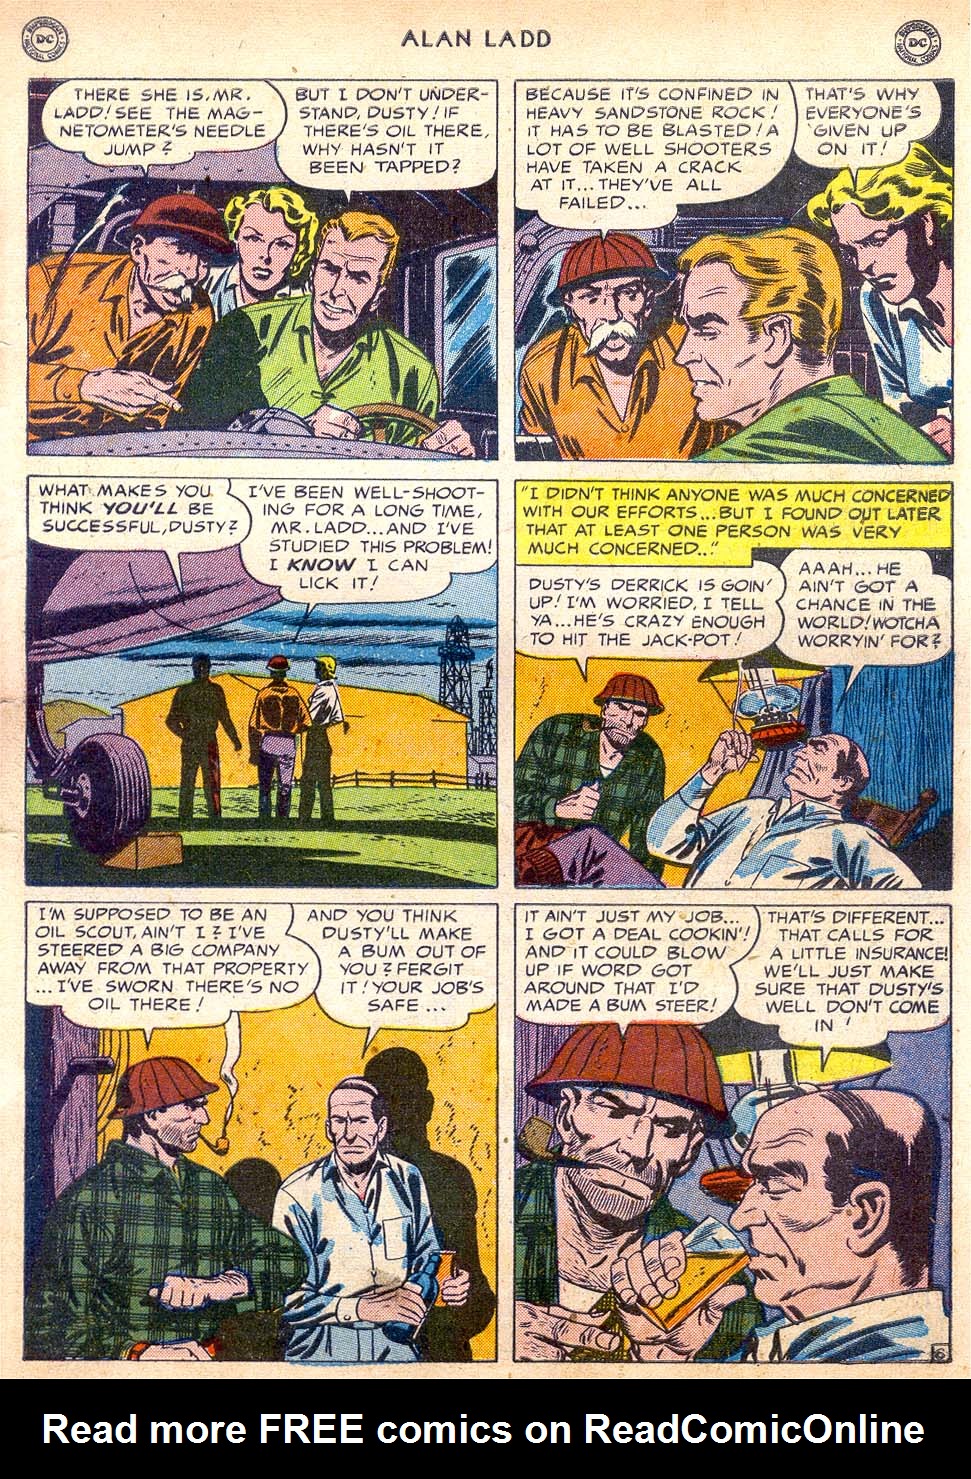 Read online Adventures of Alan Ladd comic -  Issue #4 - 45